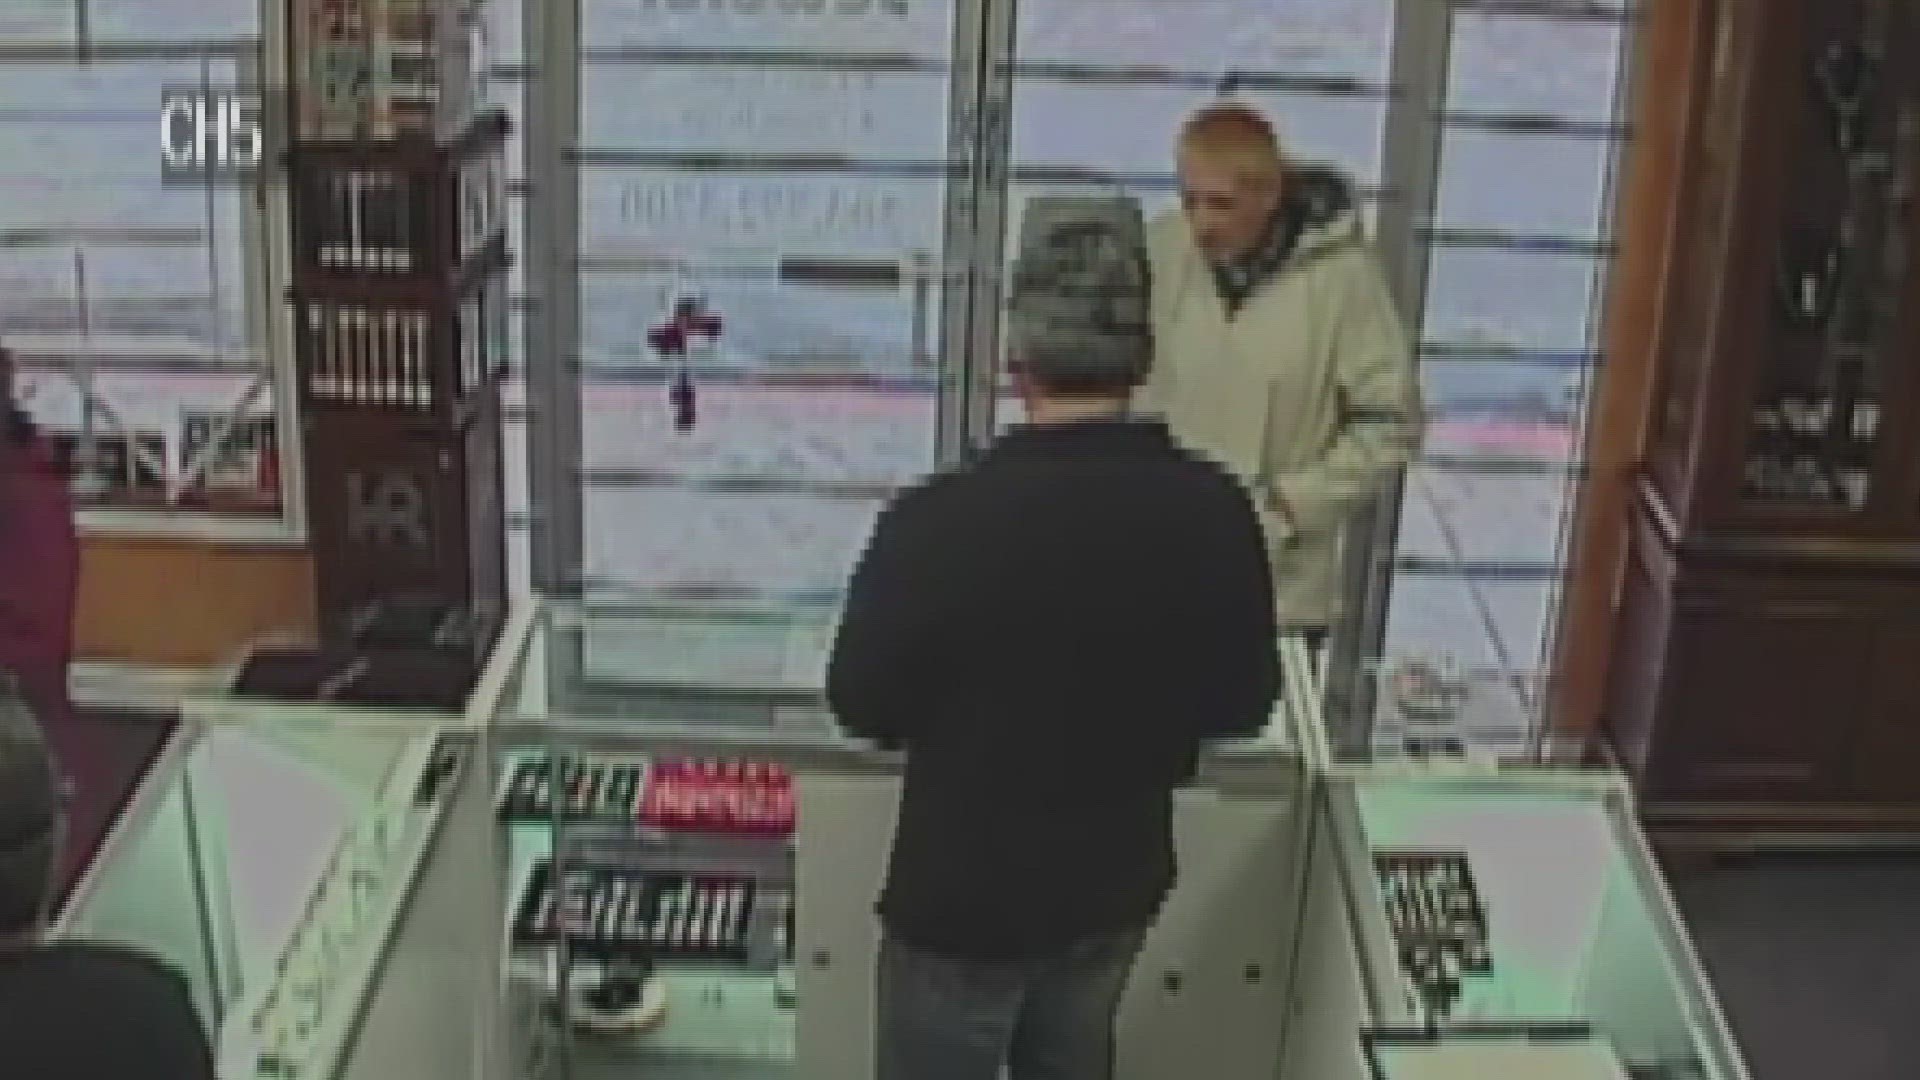 James Margulis is accused of stealing from at least eight jewelry stores in two months.